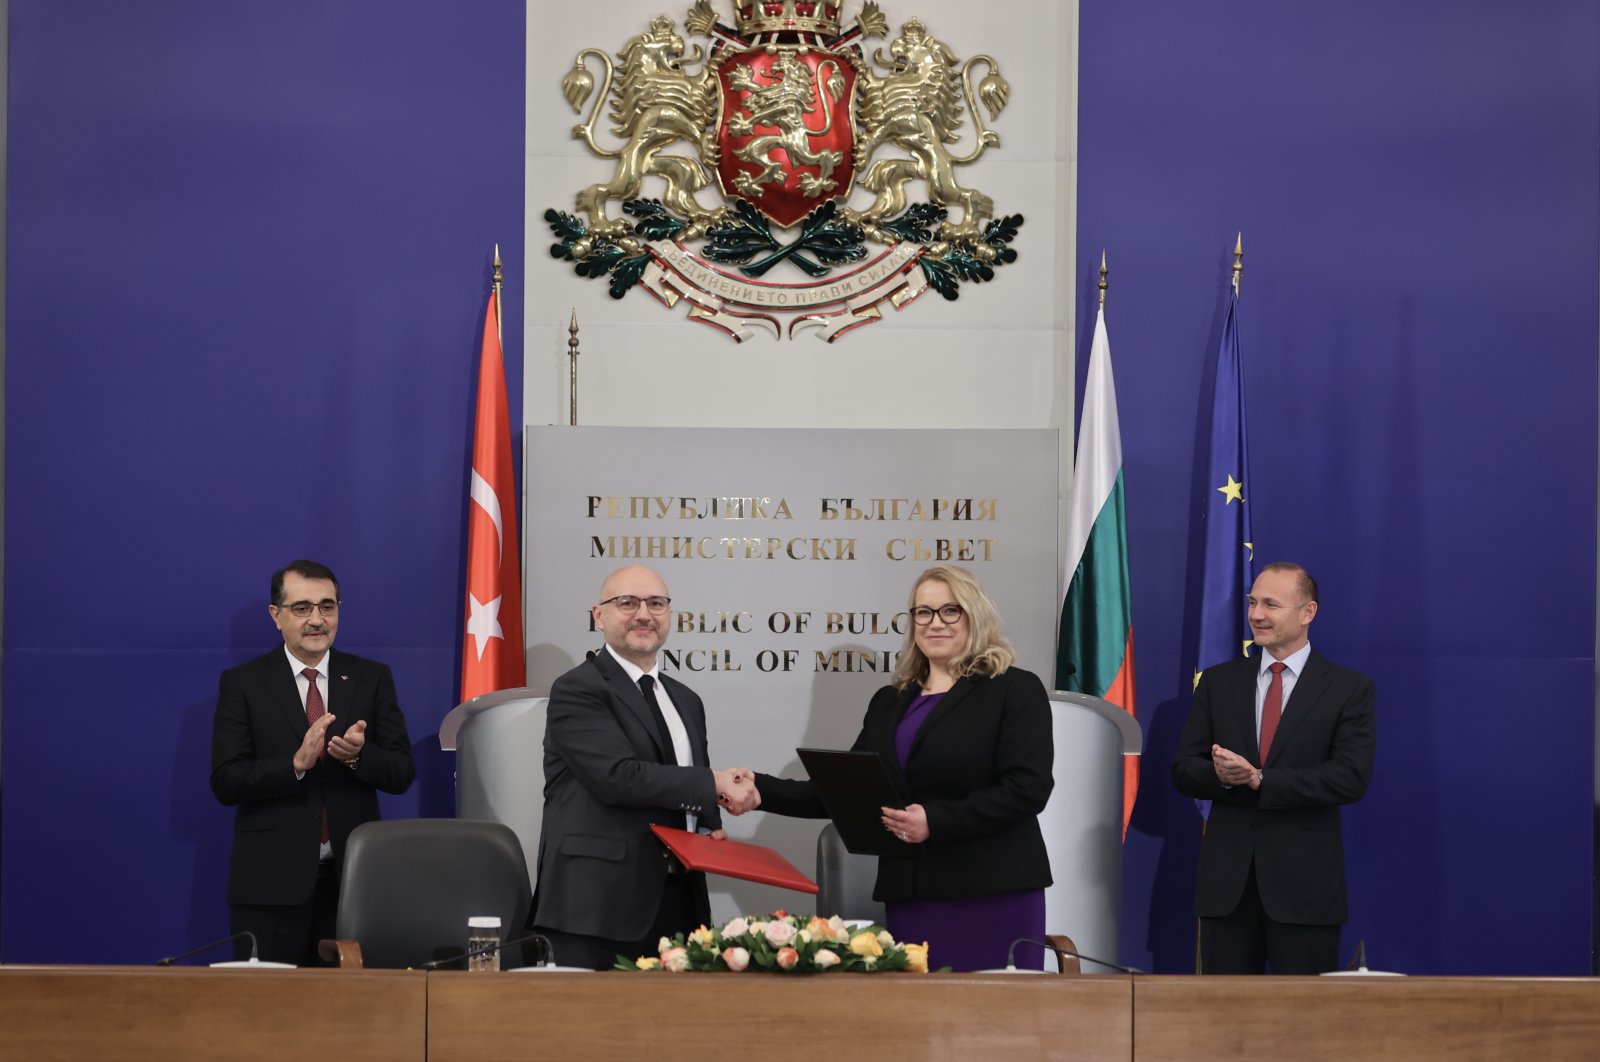 Turkey's Energy and Natural Resources Minister Fatih Dönmez (L) and his Bulgarian counterpart Rossen Hristov (R) are seen during a signing ceremony for a long-term natural gas agreement, in Sofia.